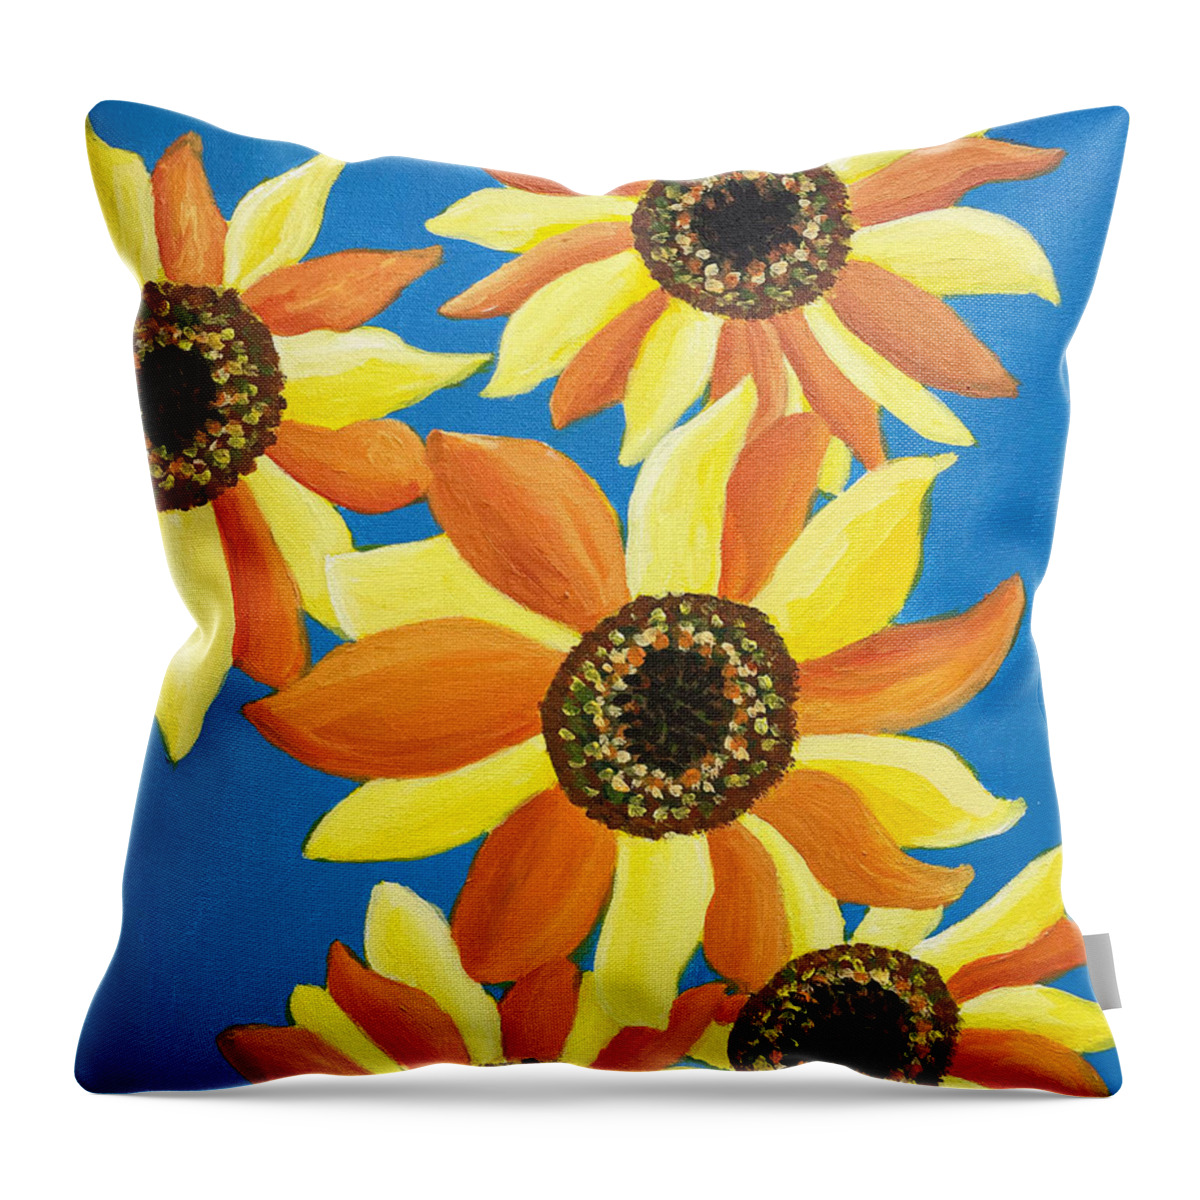 Sunflower Throw Pillow featuring the painting Sunflowers Five by Christina Wedberg